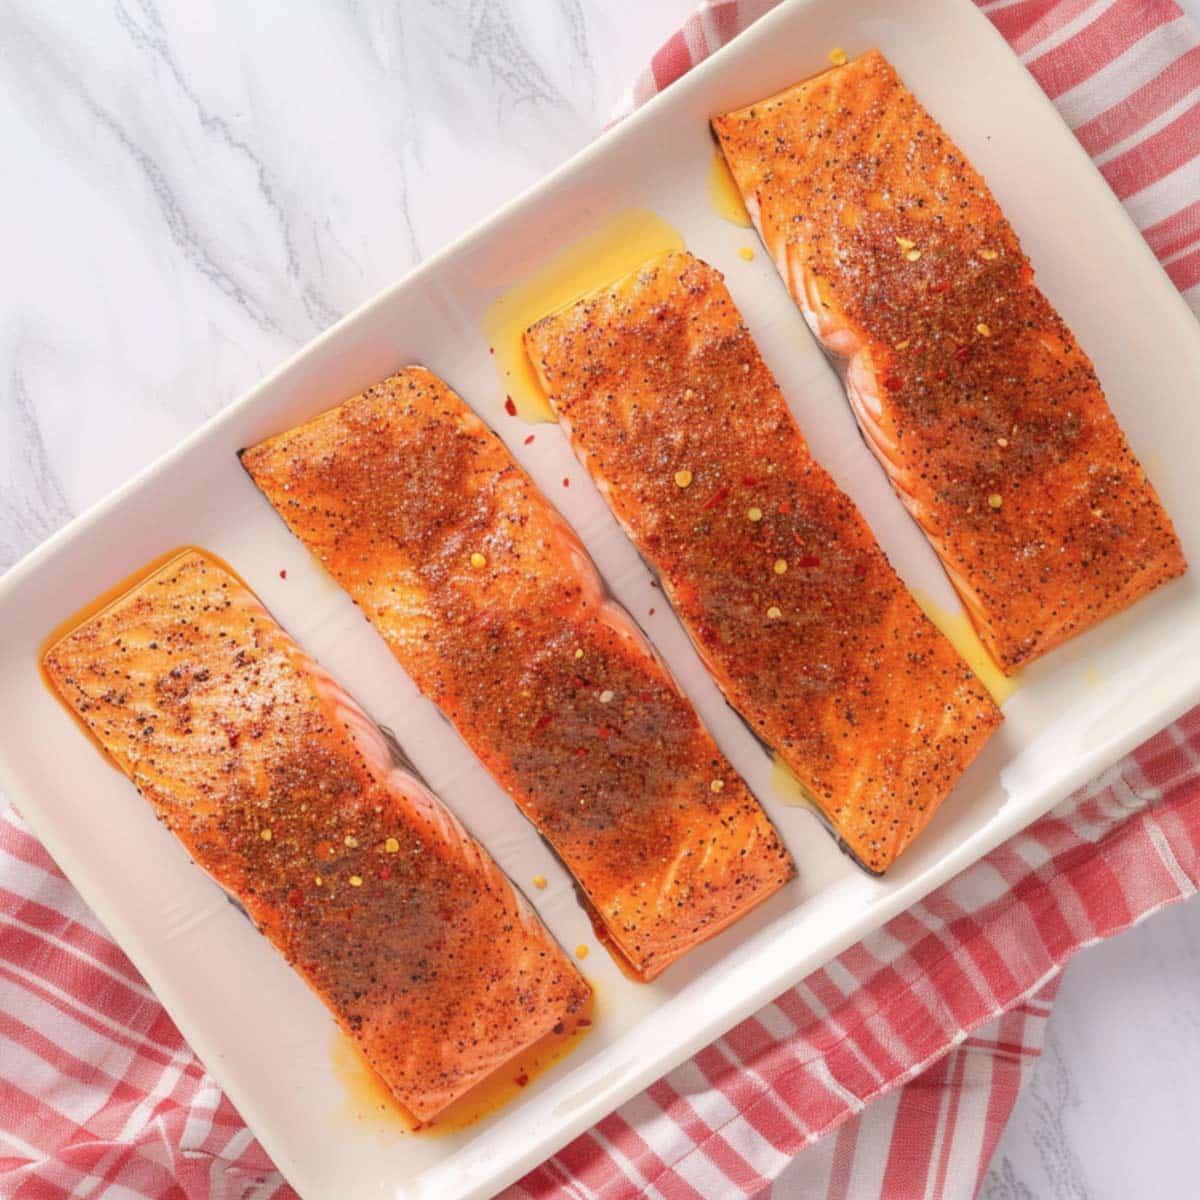 Seasoning salmon fillets with a spice mixture for air fryer salmon tacos.